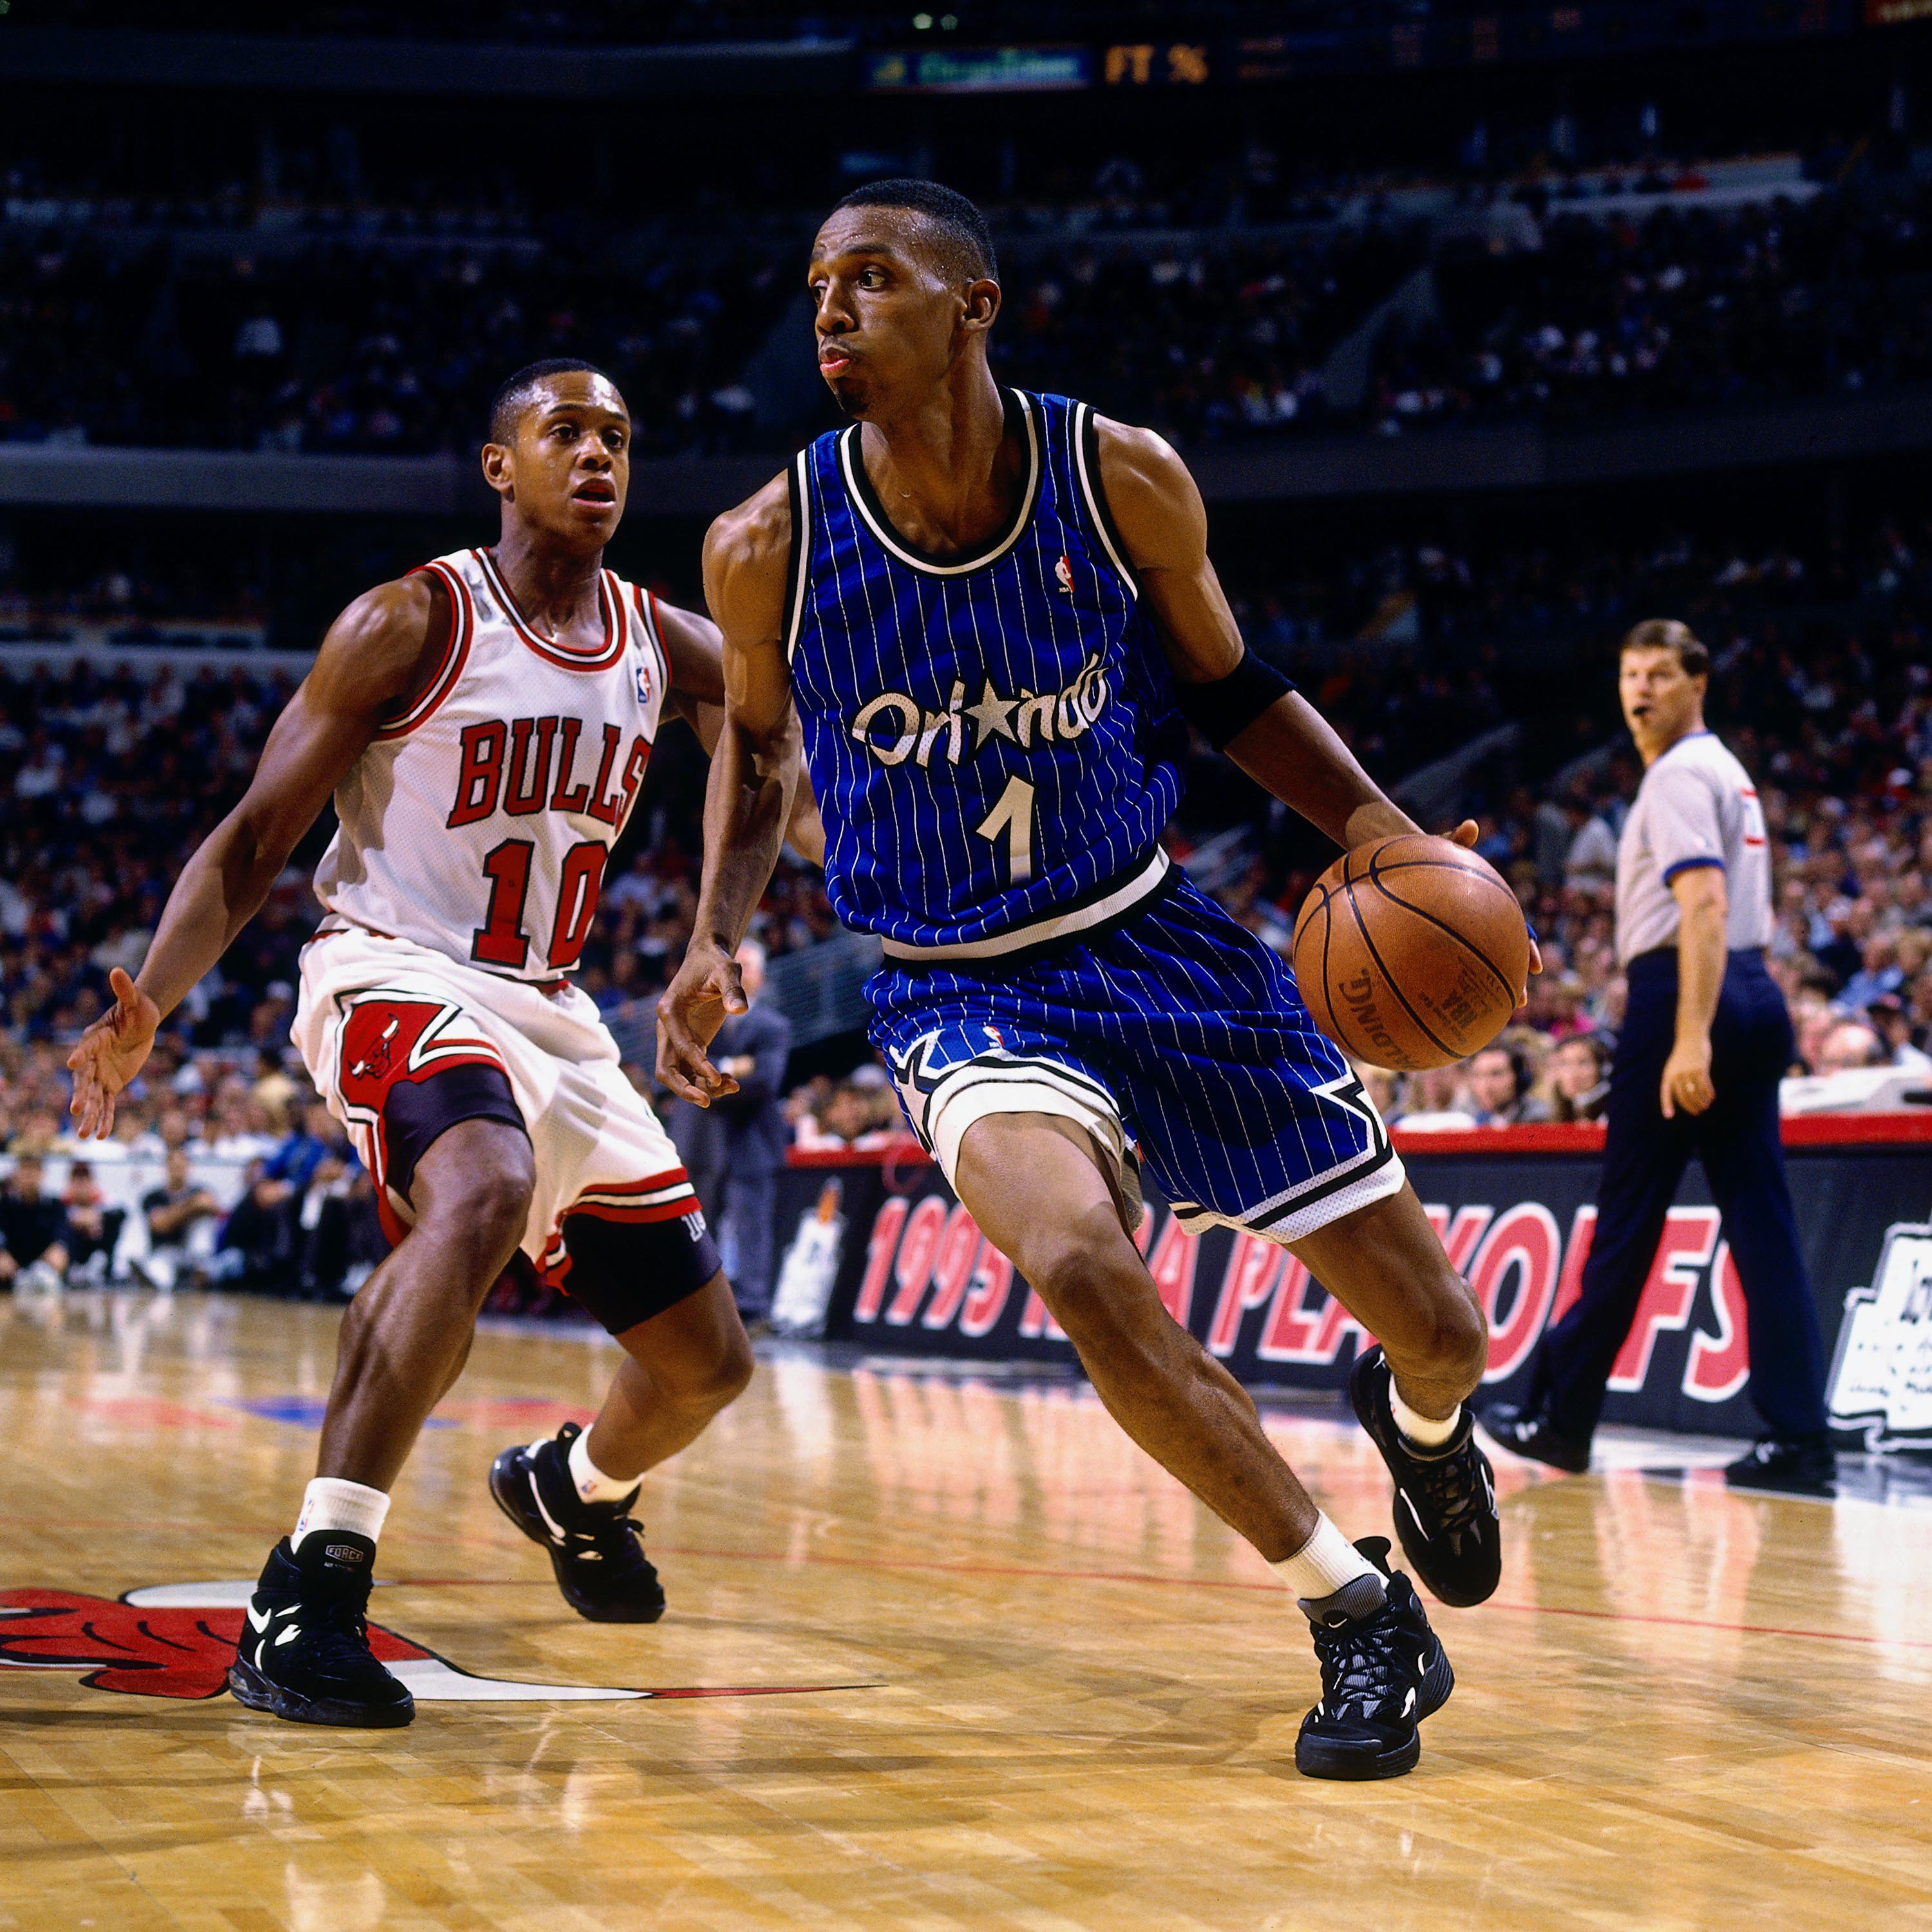 penny hardaway 1996 all star game